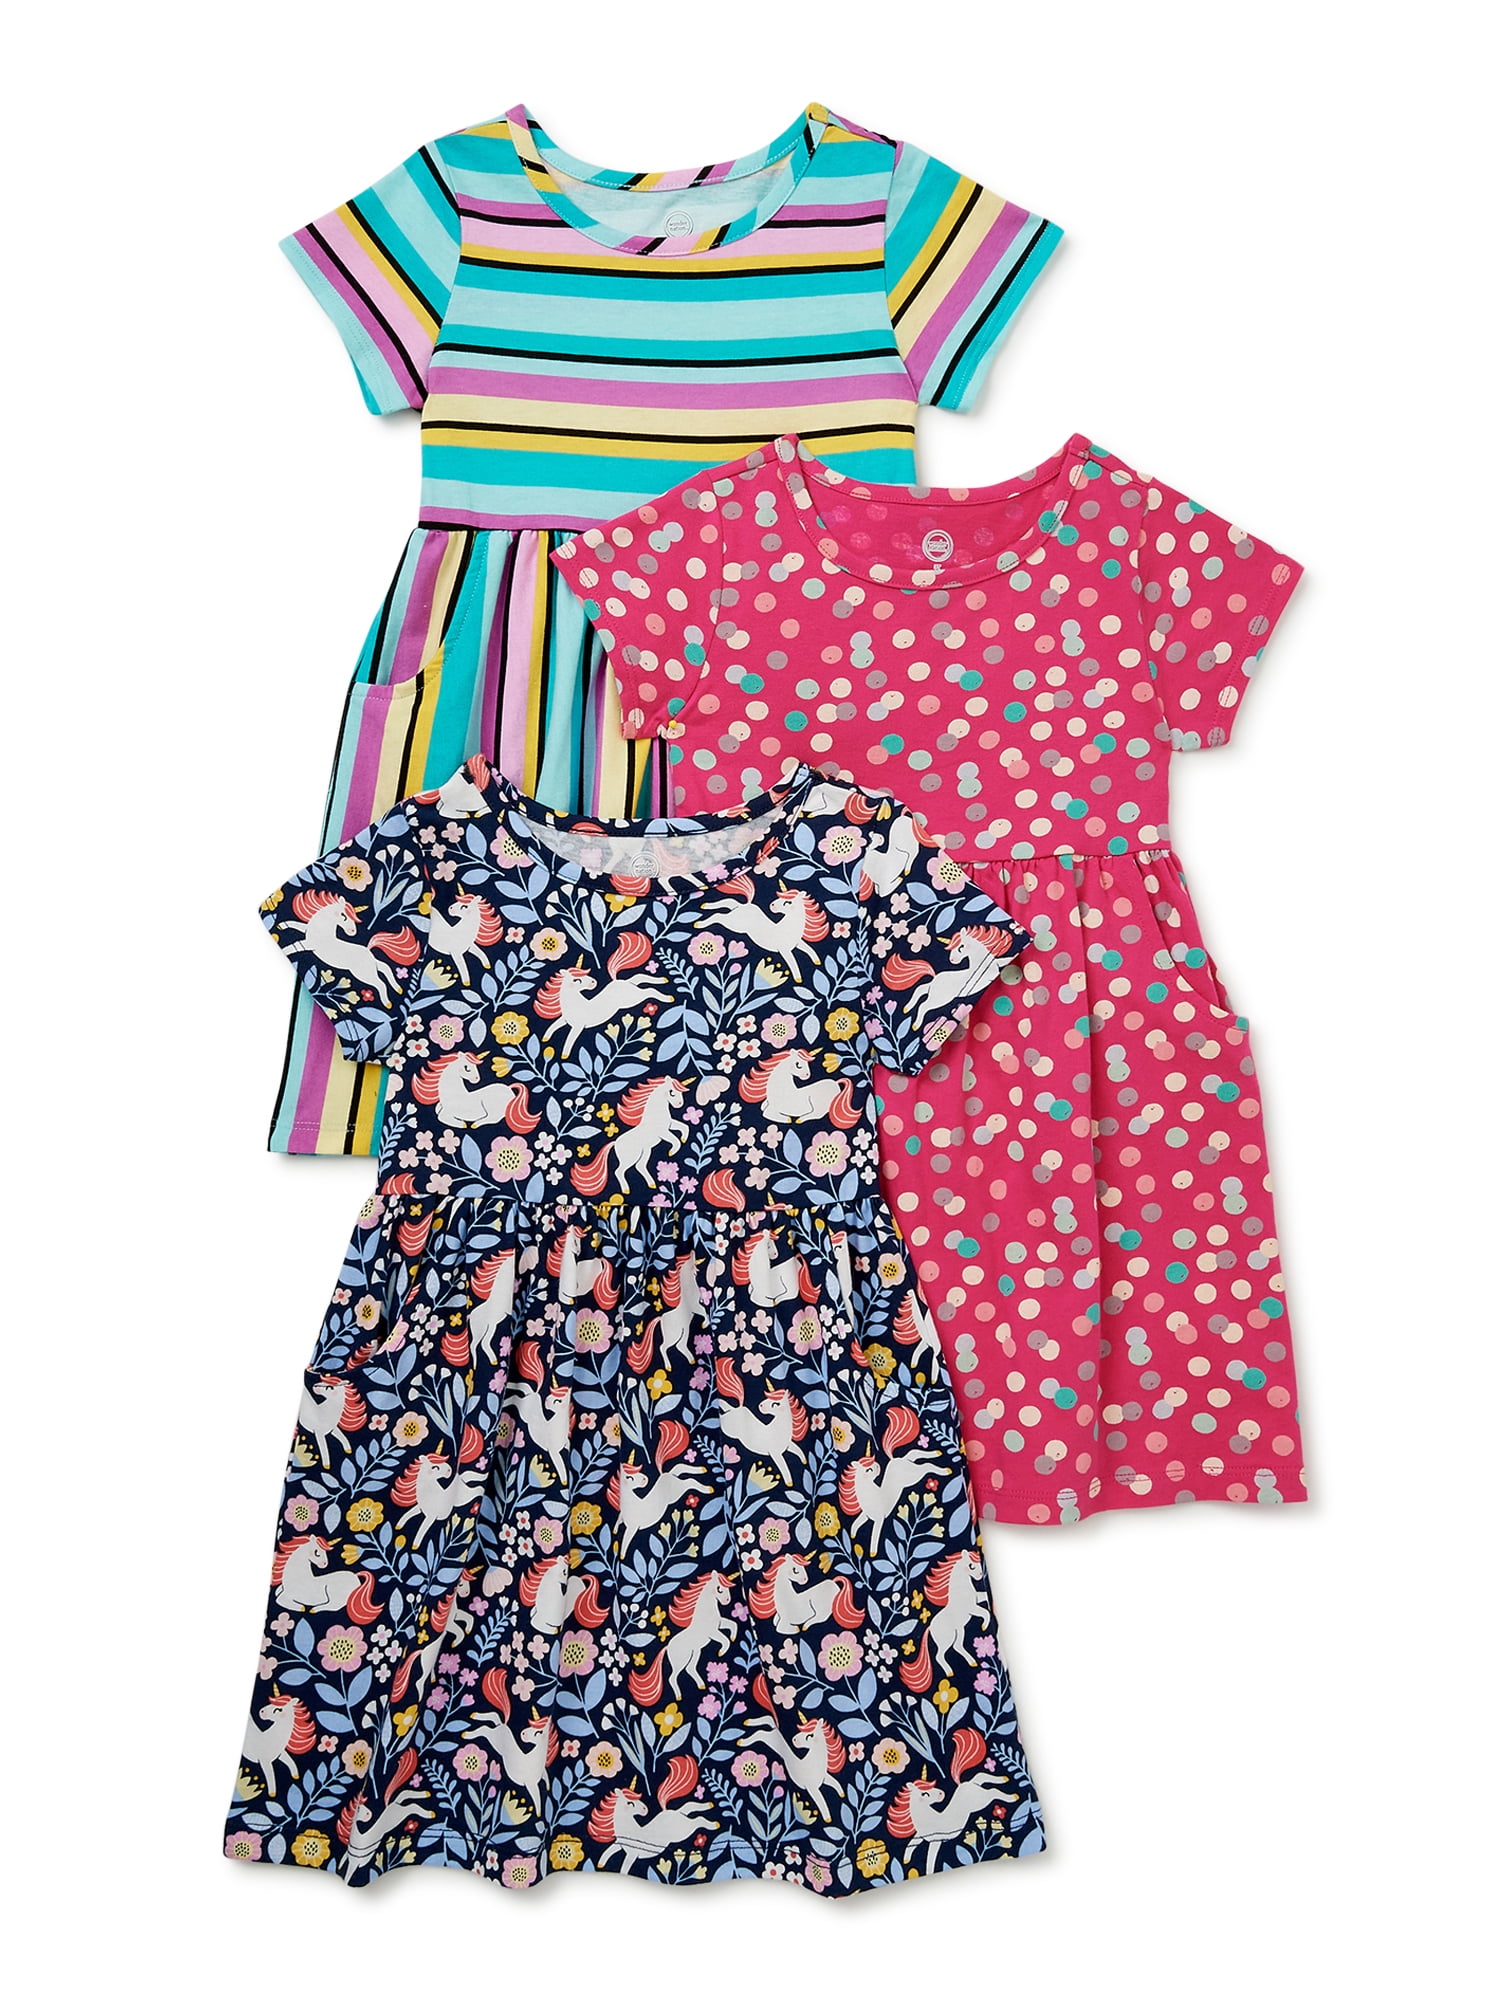 NWT Gymboree Cute on the Coast  SZ 2T,4T  Coral dress toddler girl 